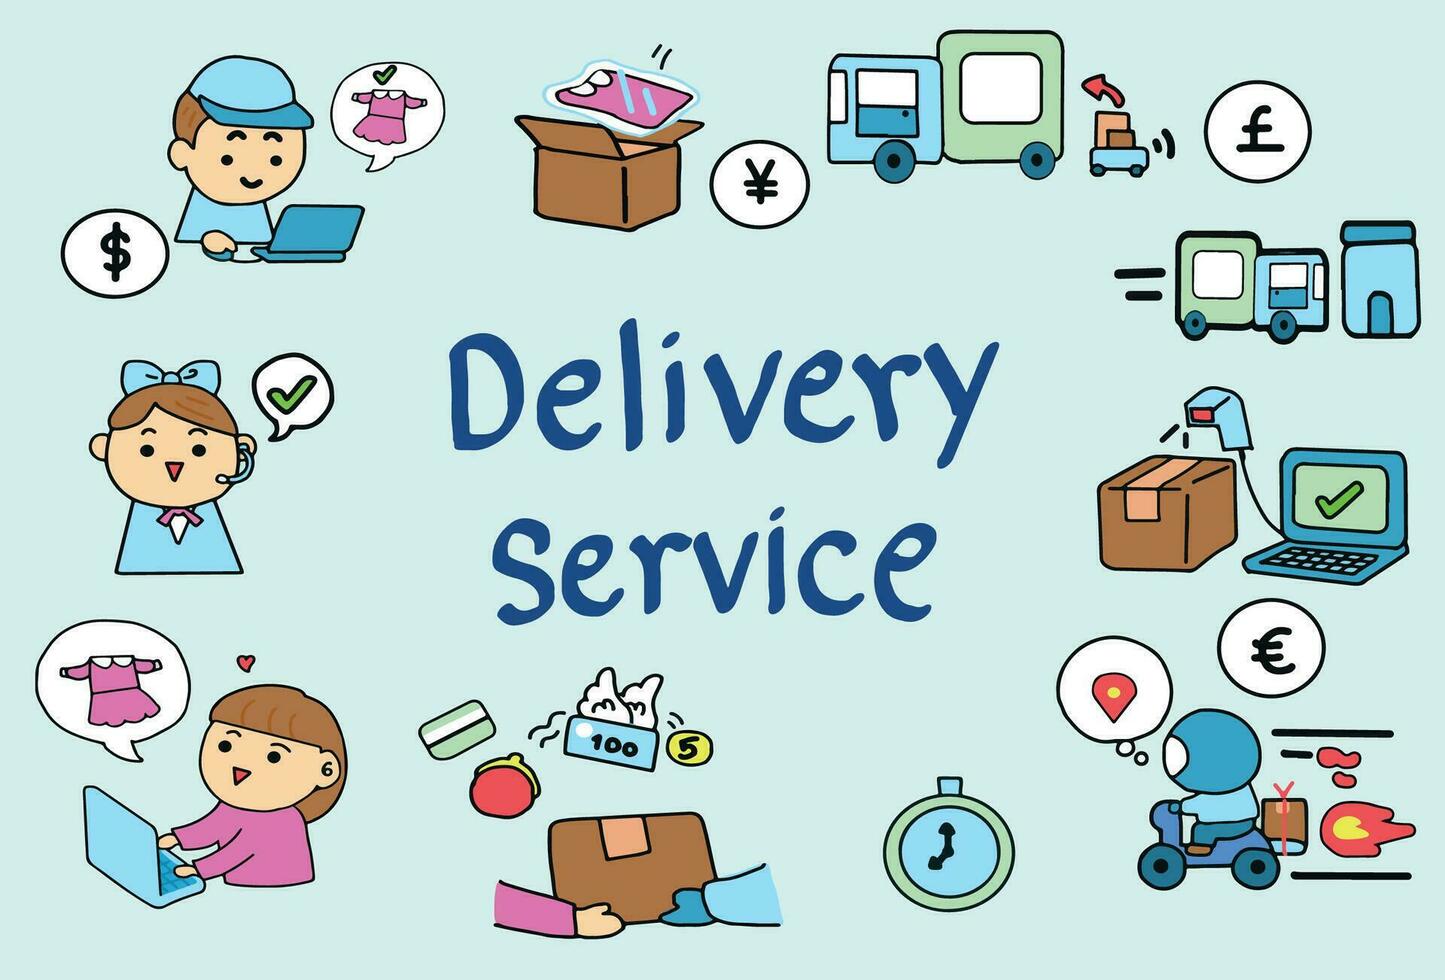 Delivery service concept doodle art -cartoon character style. vector